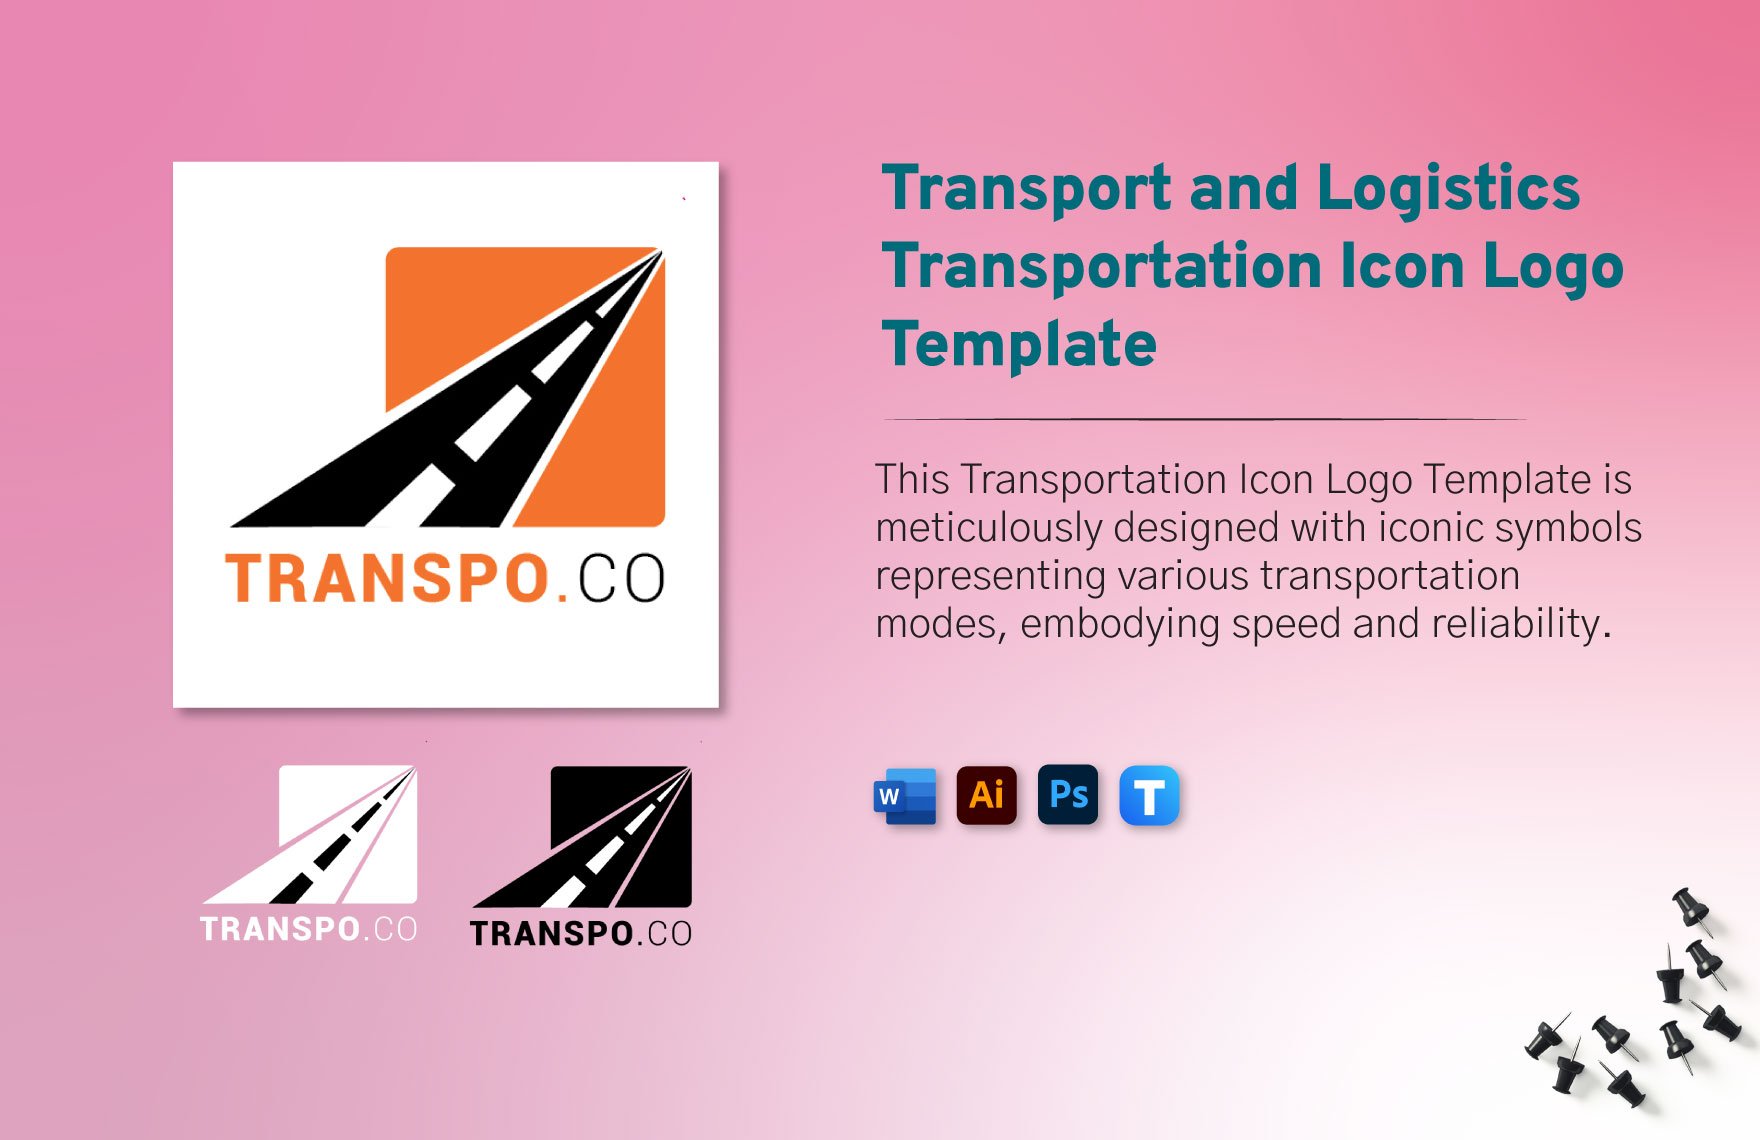 Transport and Logistics Transportation Icon Logo Template in Word, Illustrator, PSD